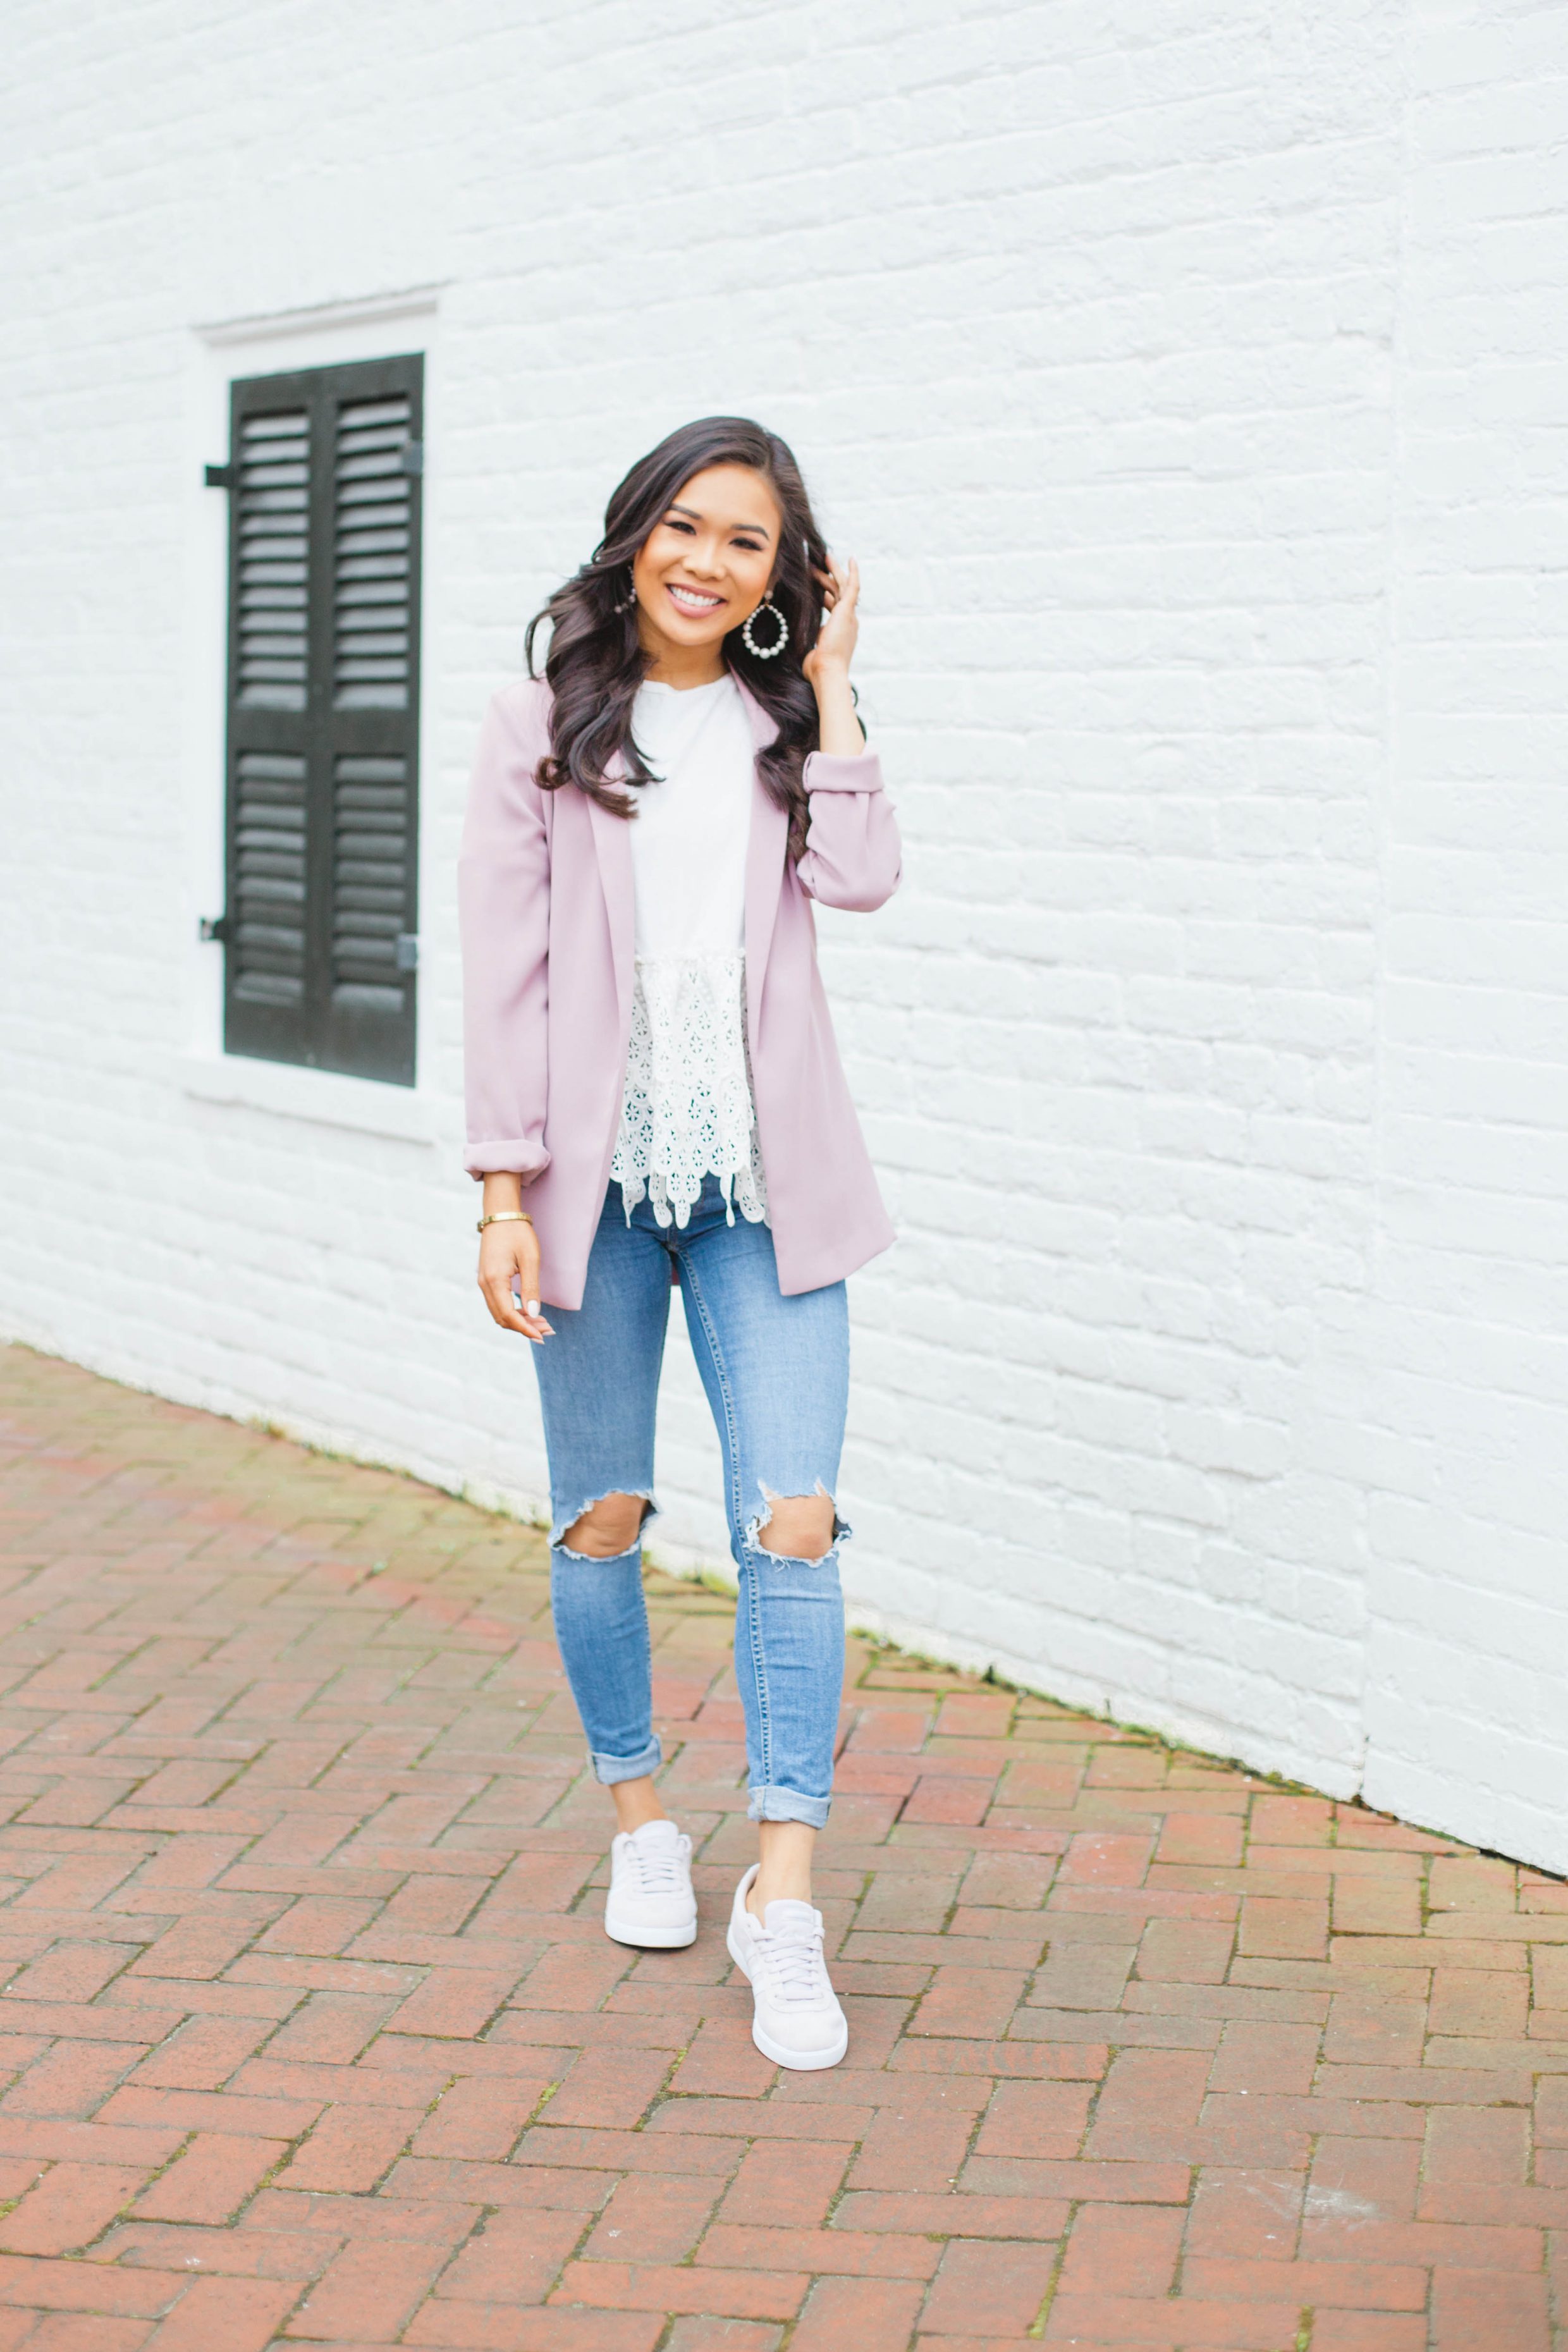 How to style sneakers casually for spring